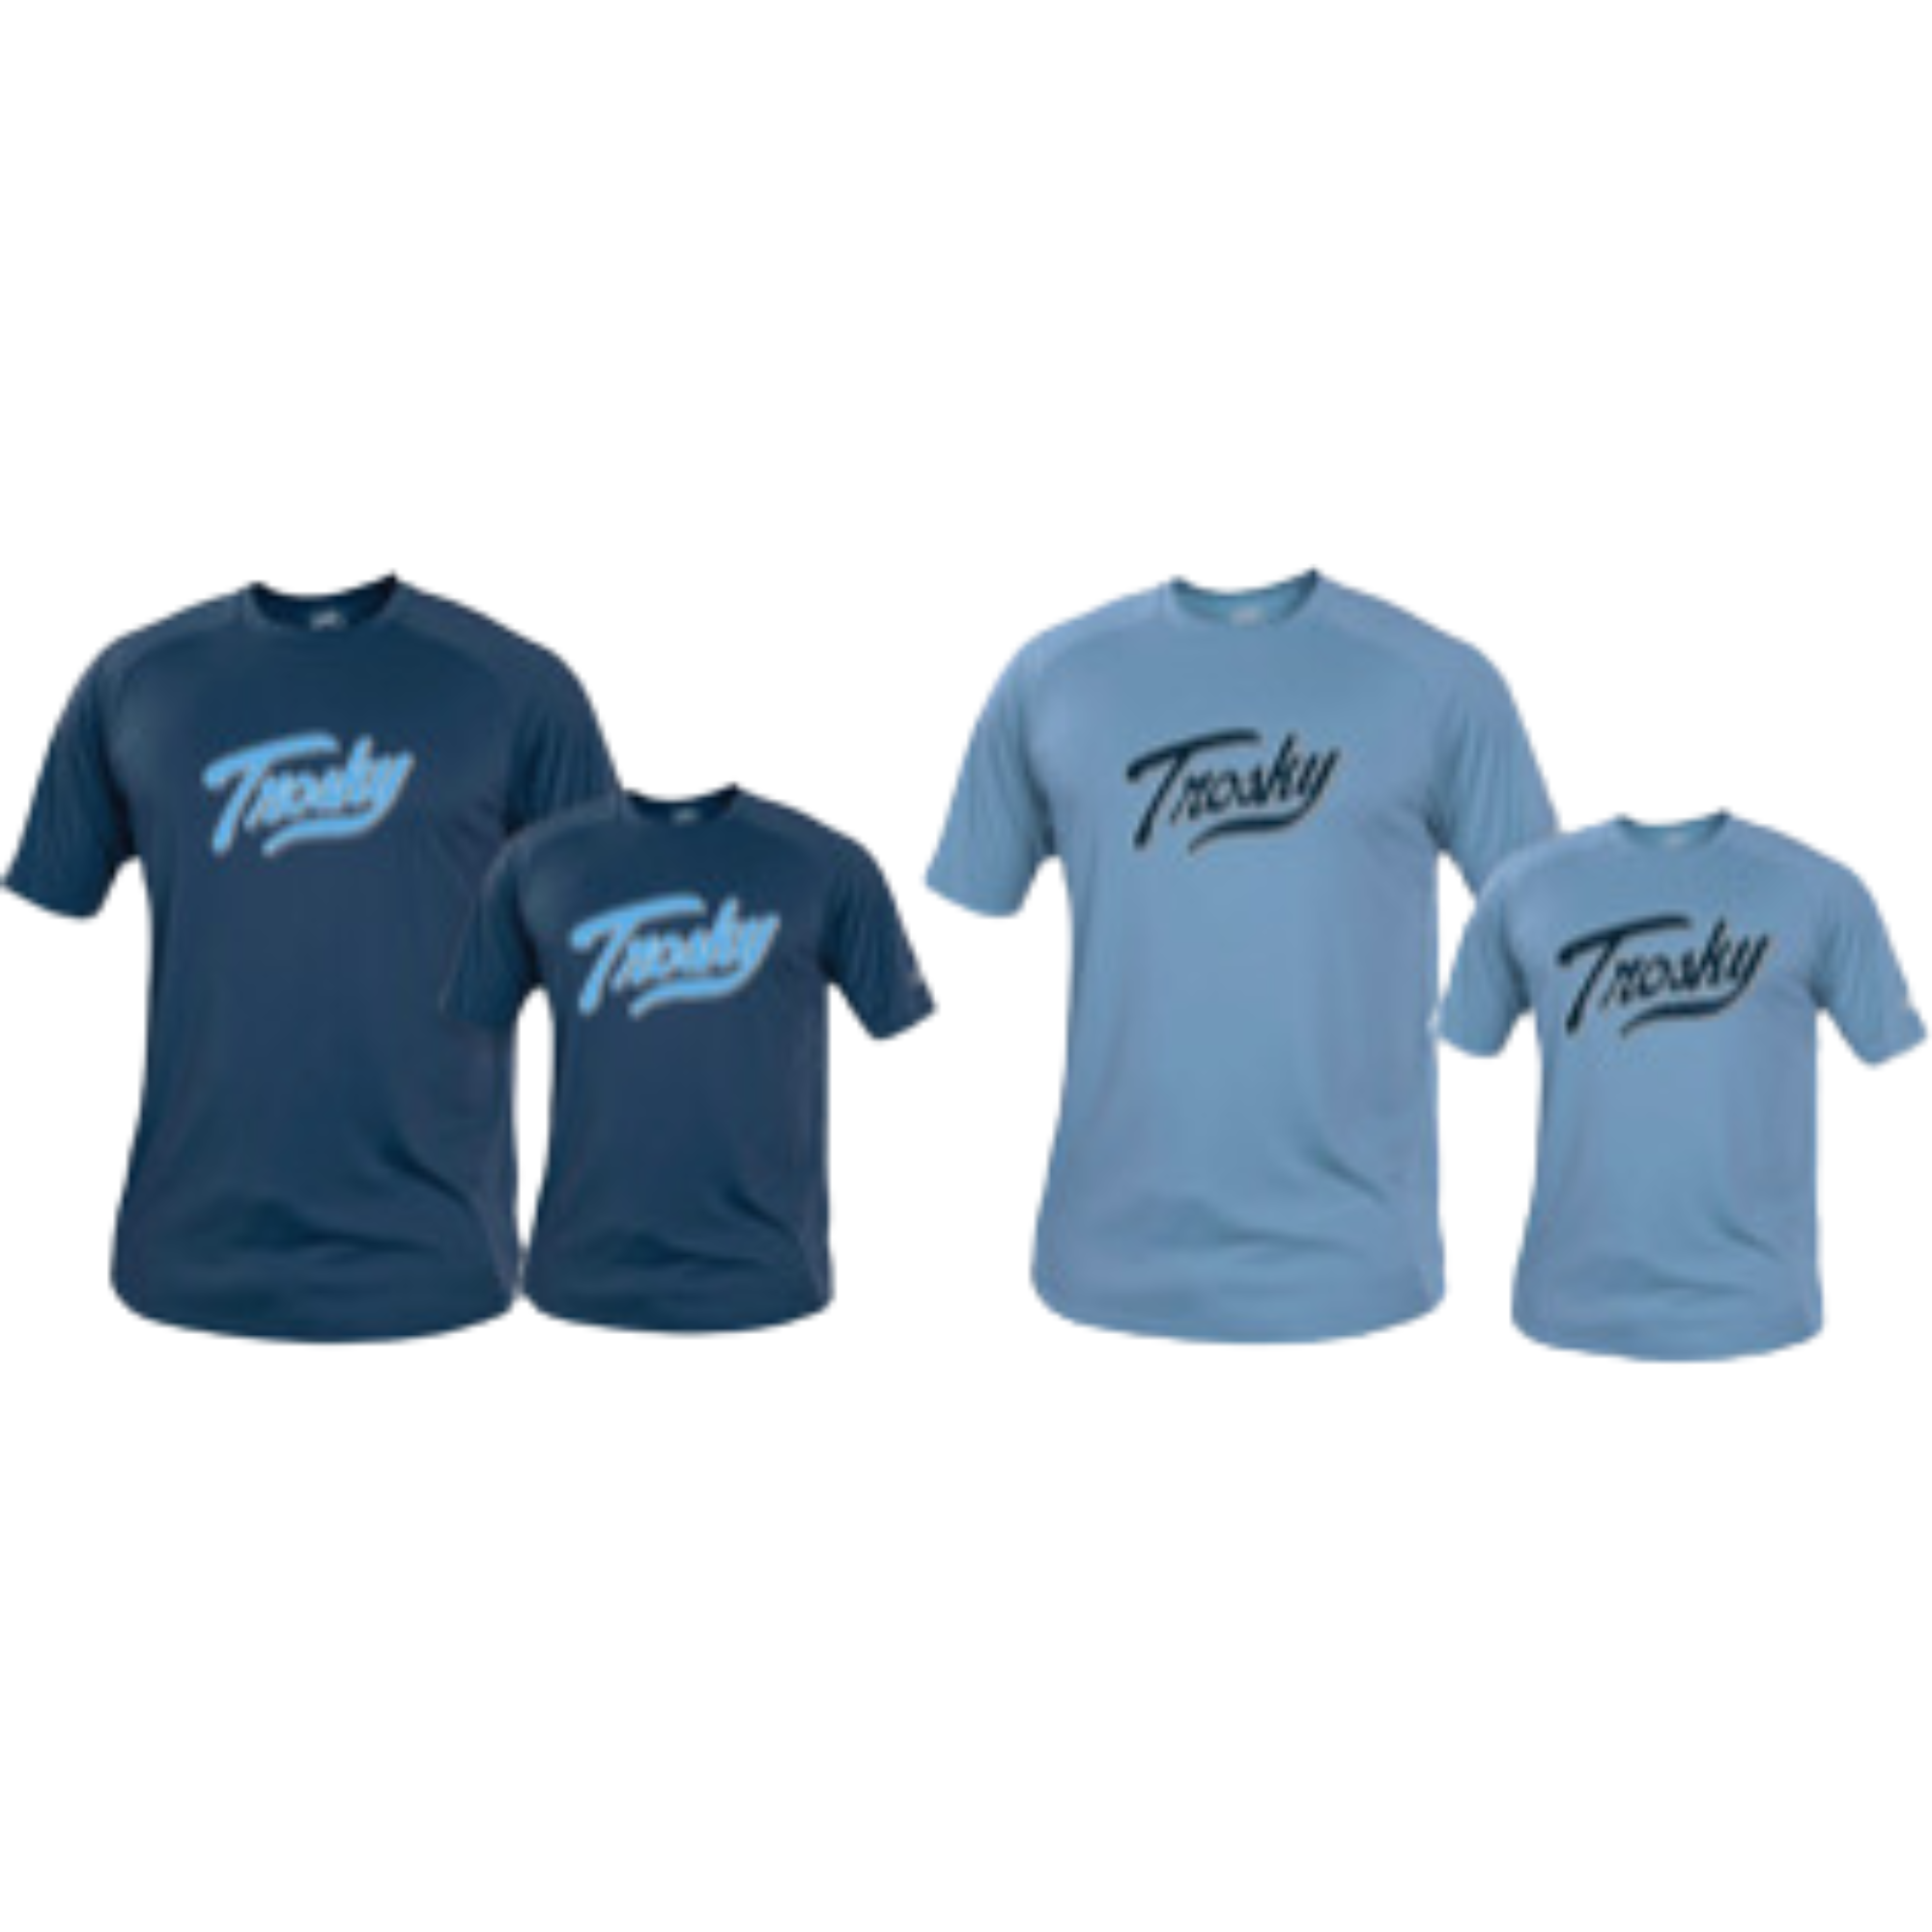 Rawlings Youth Trosky Fan Gear Numbered Performance Tee (set of 2 Col. Blue & Navy) - YXL